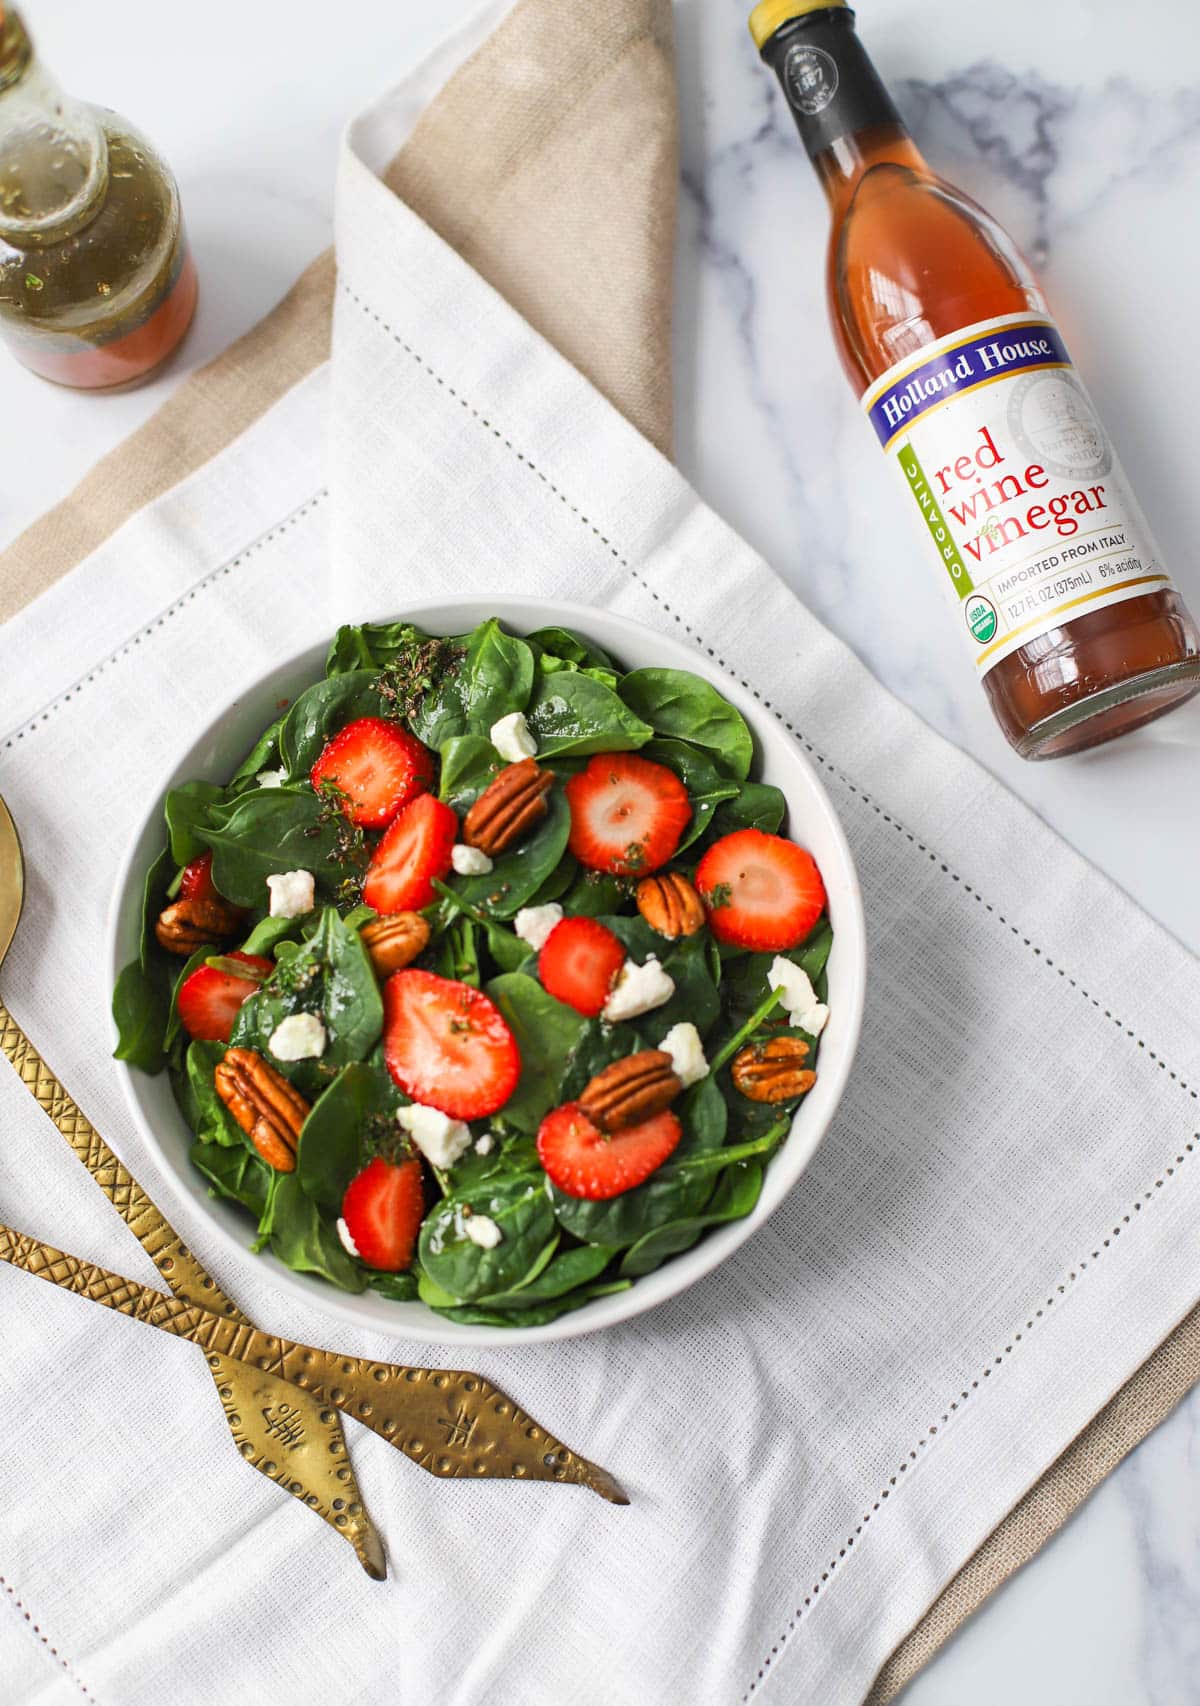 Spinach with strawberries, goat cheese, pecans, and red wine vinaigrette in a white bowl on a white napkin with bottle of red wine vinegar and bronze serving set.